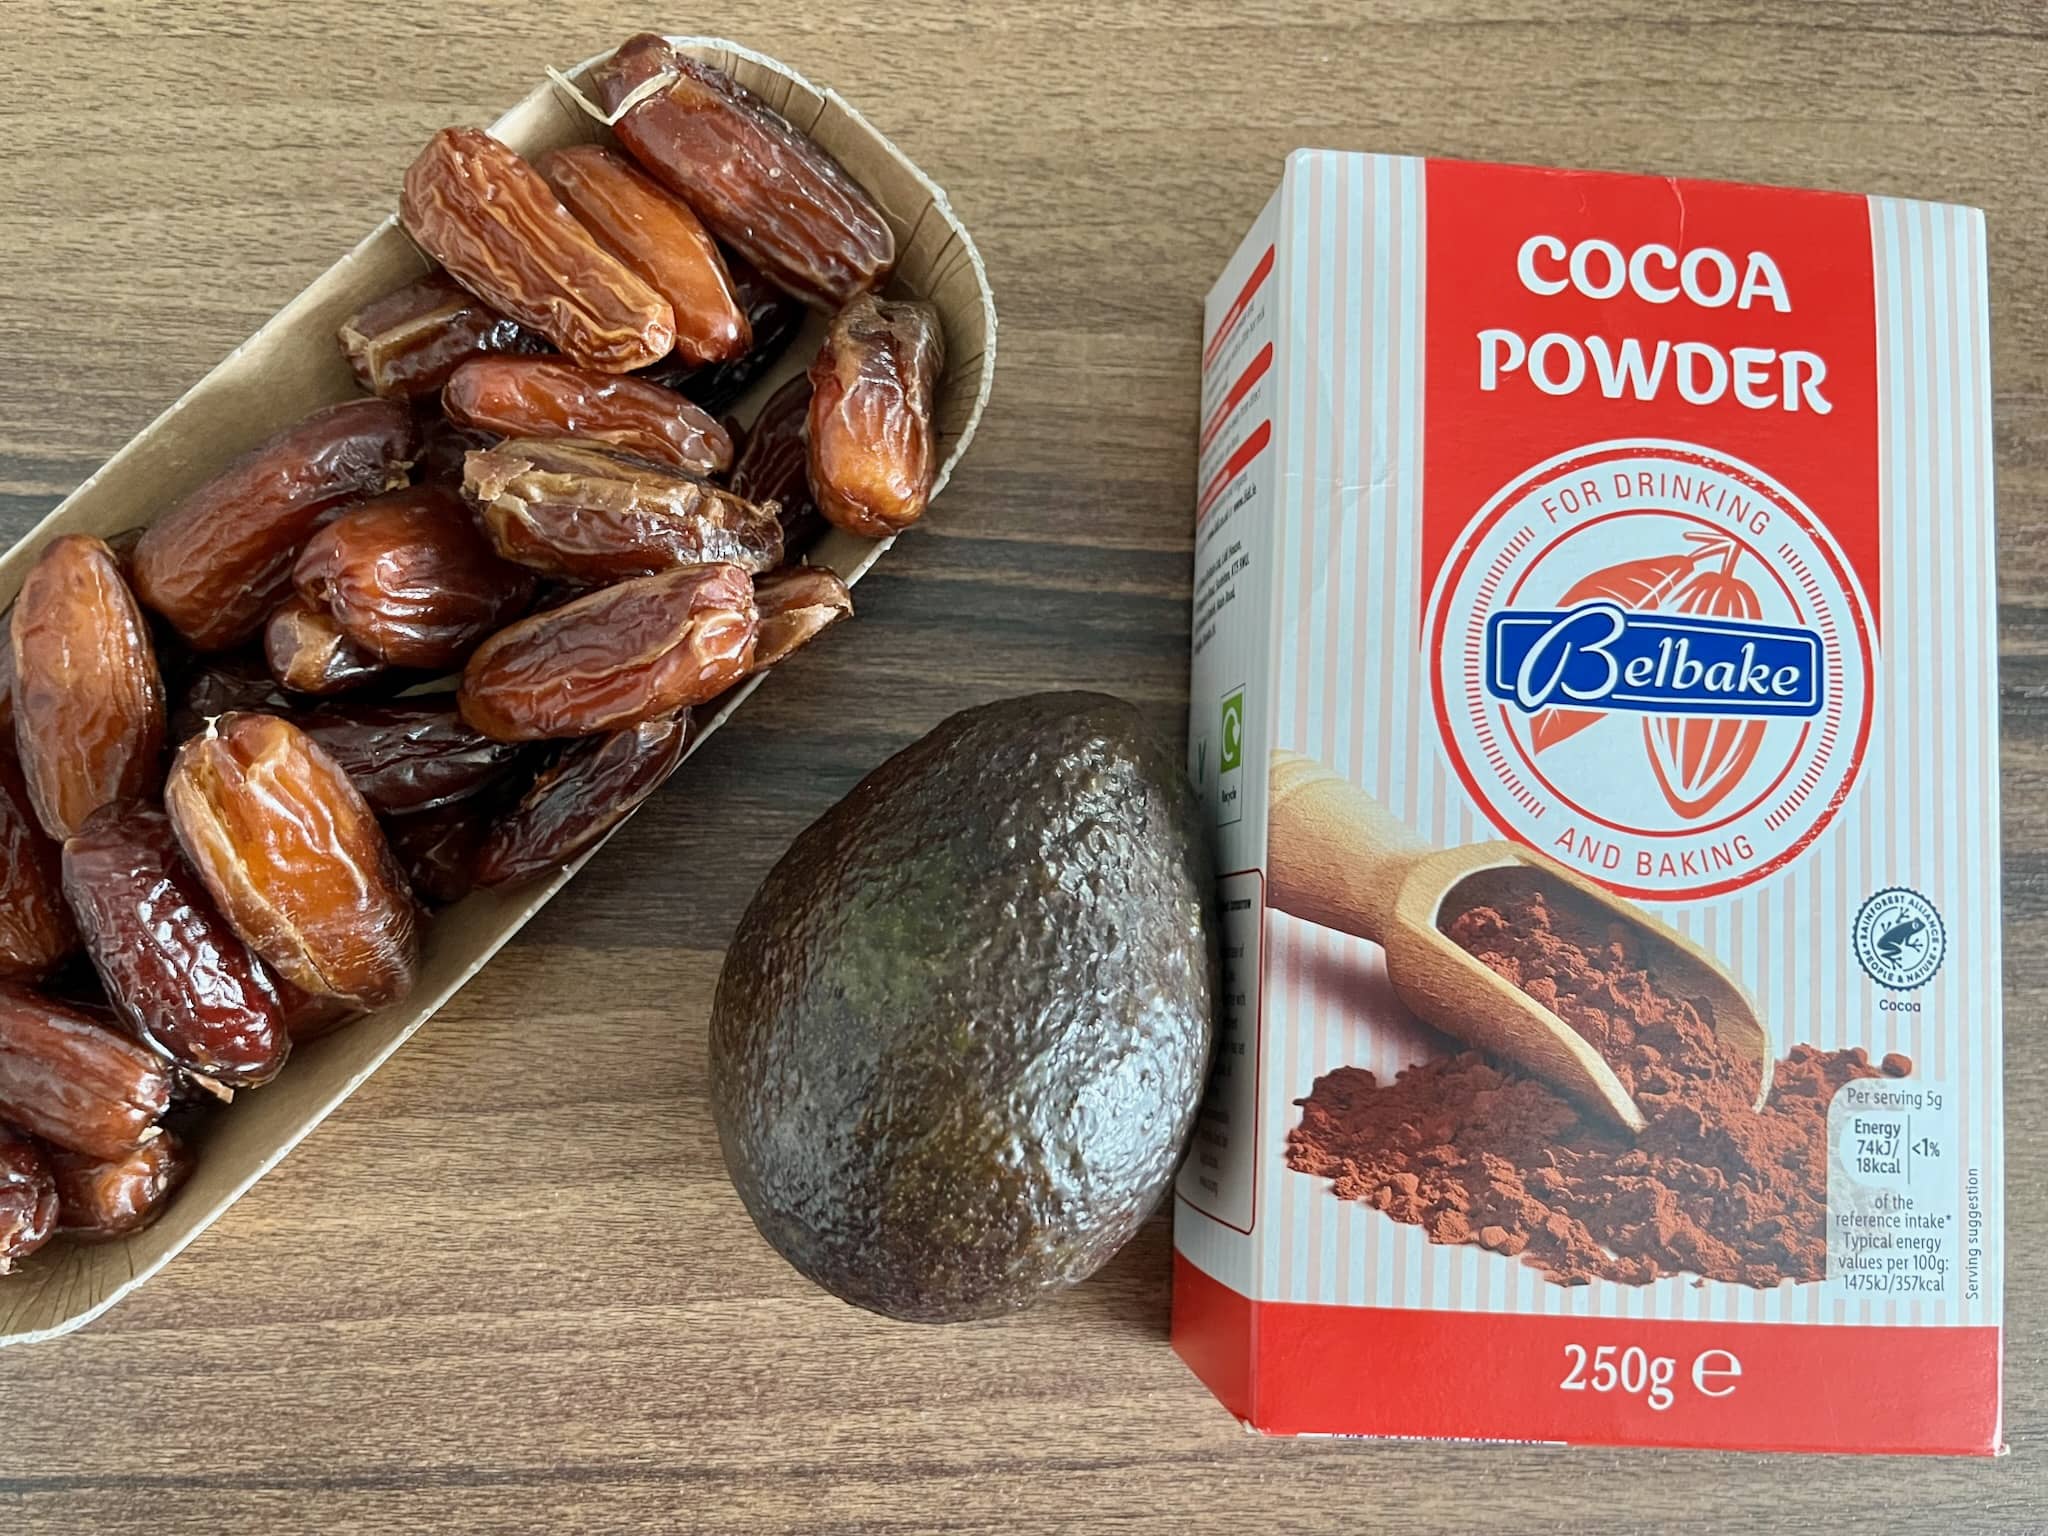 Seeded dates, avocado and cocoa powder